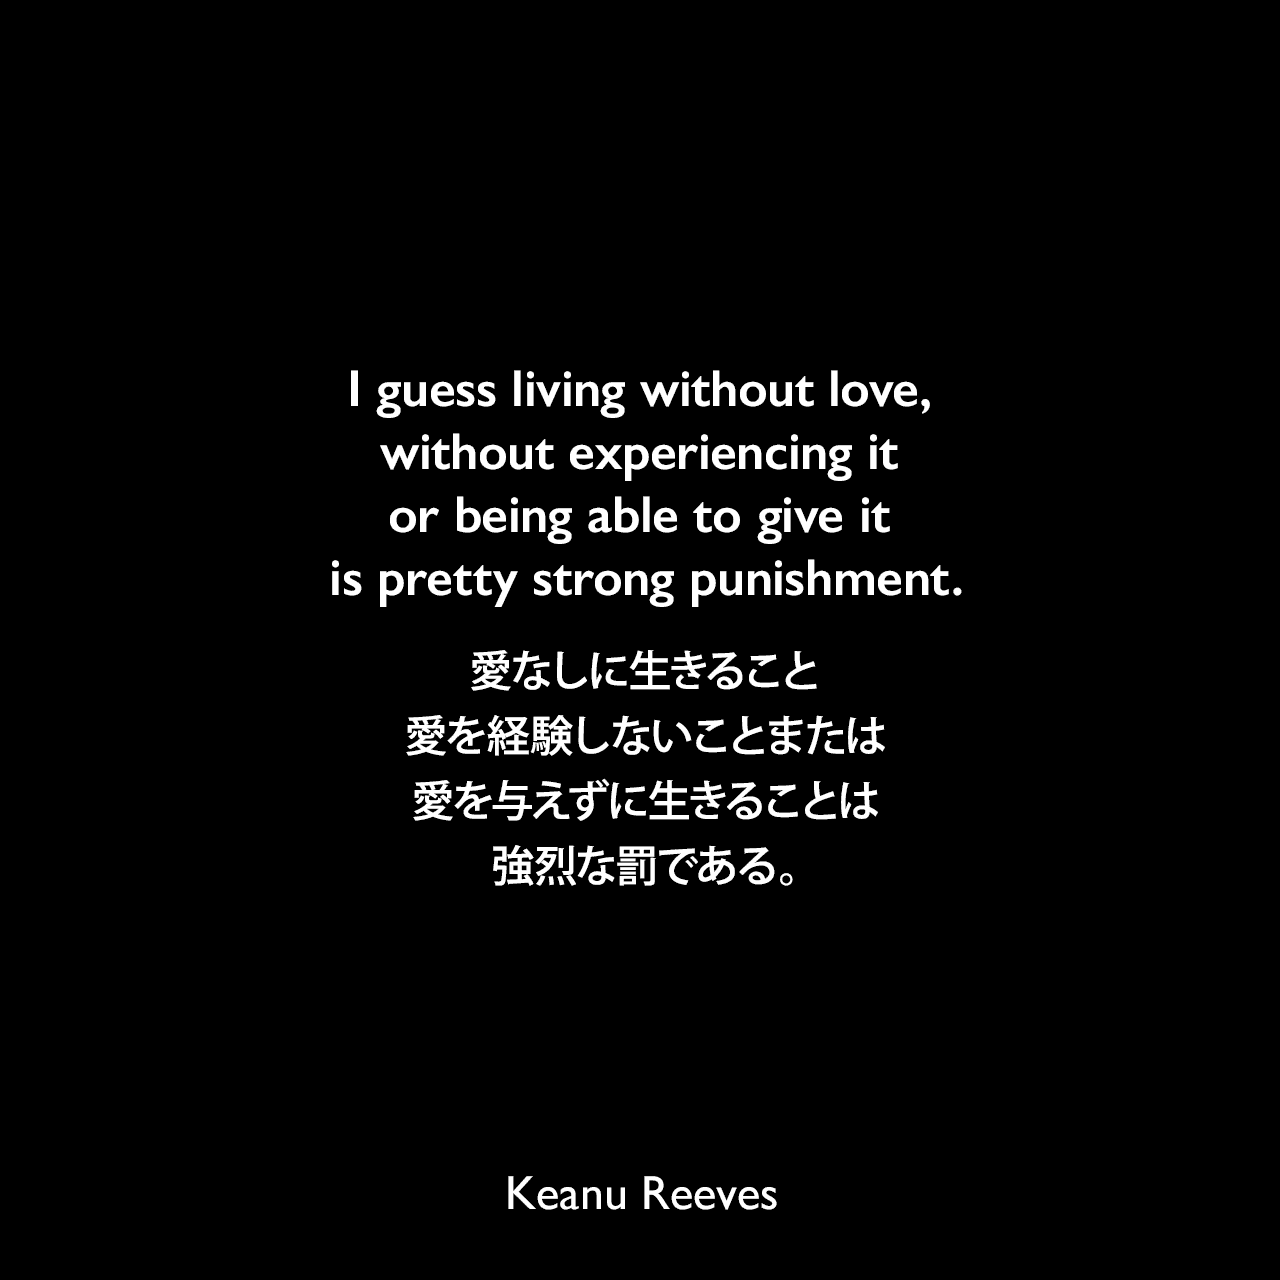 I guess living without love, without experiencing it or being able to give it is pretty strong punishment.愛なしに生きること、愛を経験しないことまたは愛を与えずに生きることは強烈な罰である。Keanu Reeves